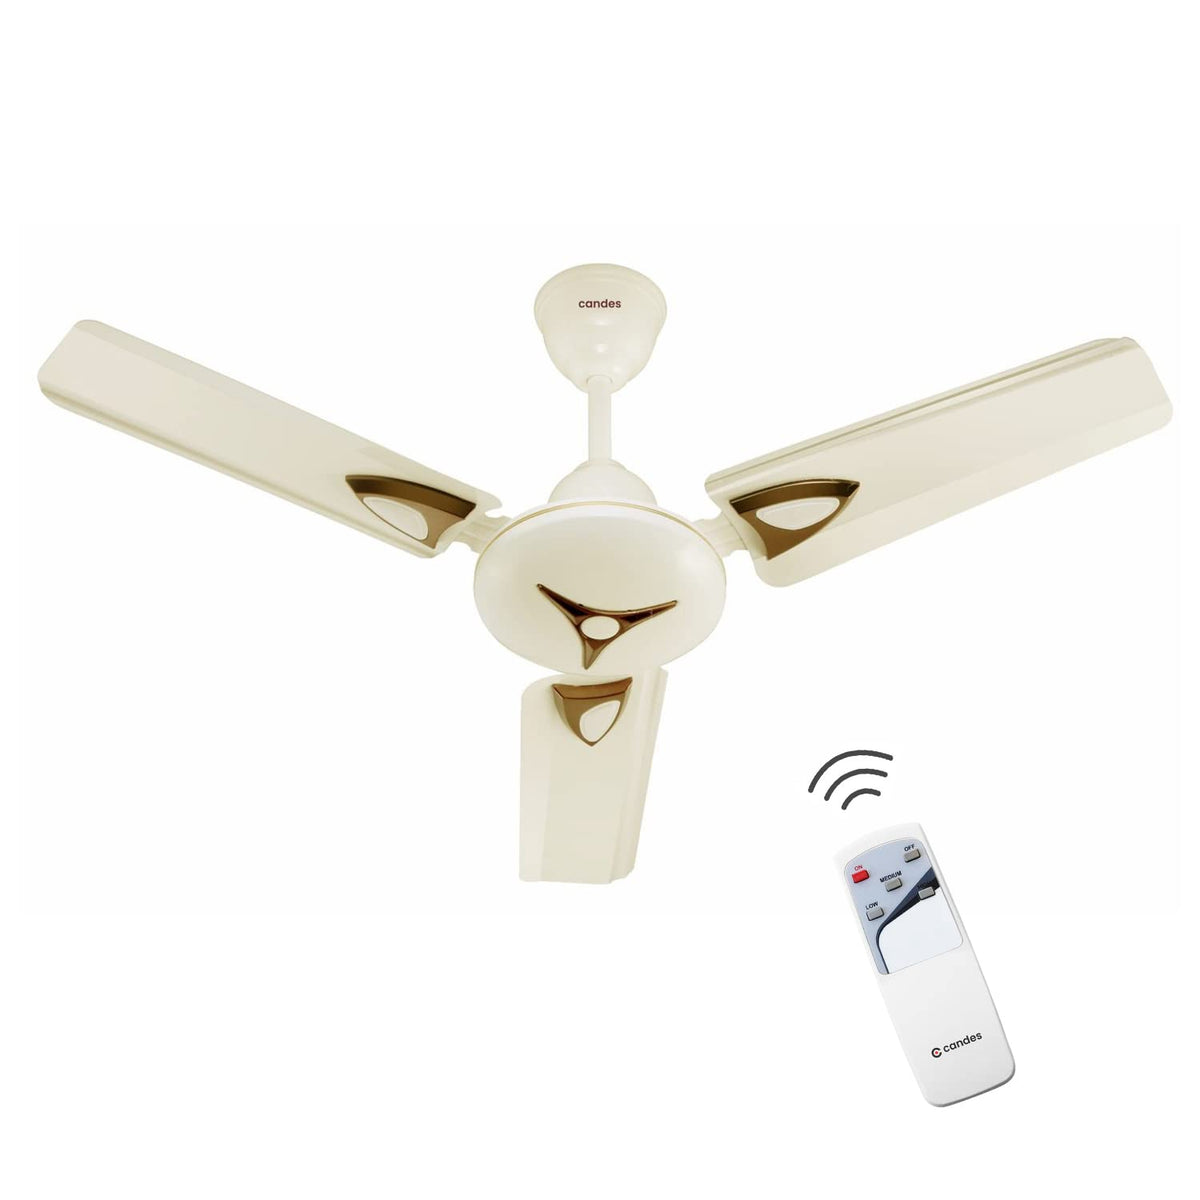 Candes Amaze 900 mm Anti Dust Decorative 3 Blade Ceiling Fan With Remote (Pack of 1) (Ivory)